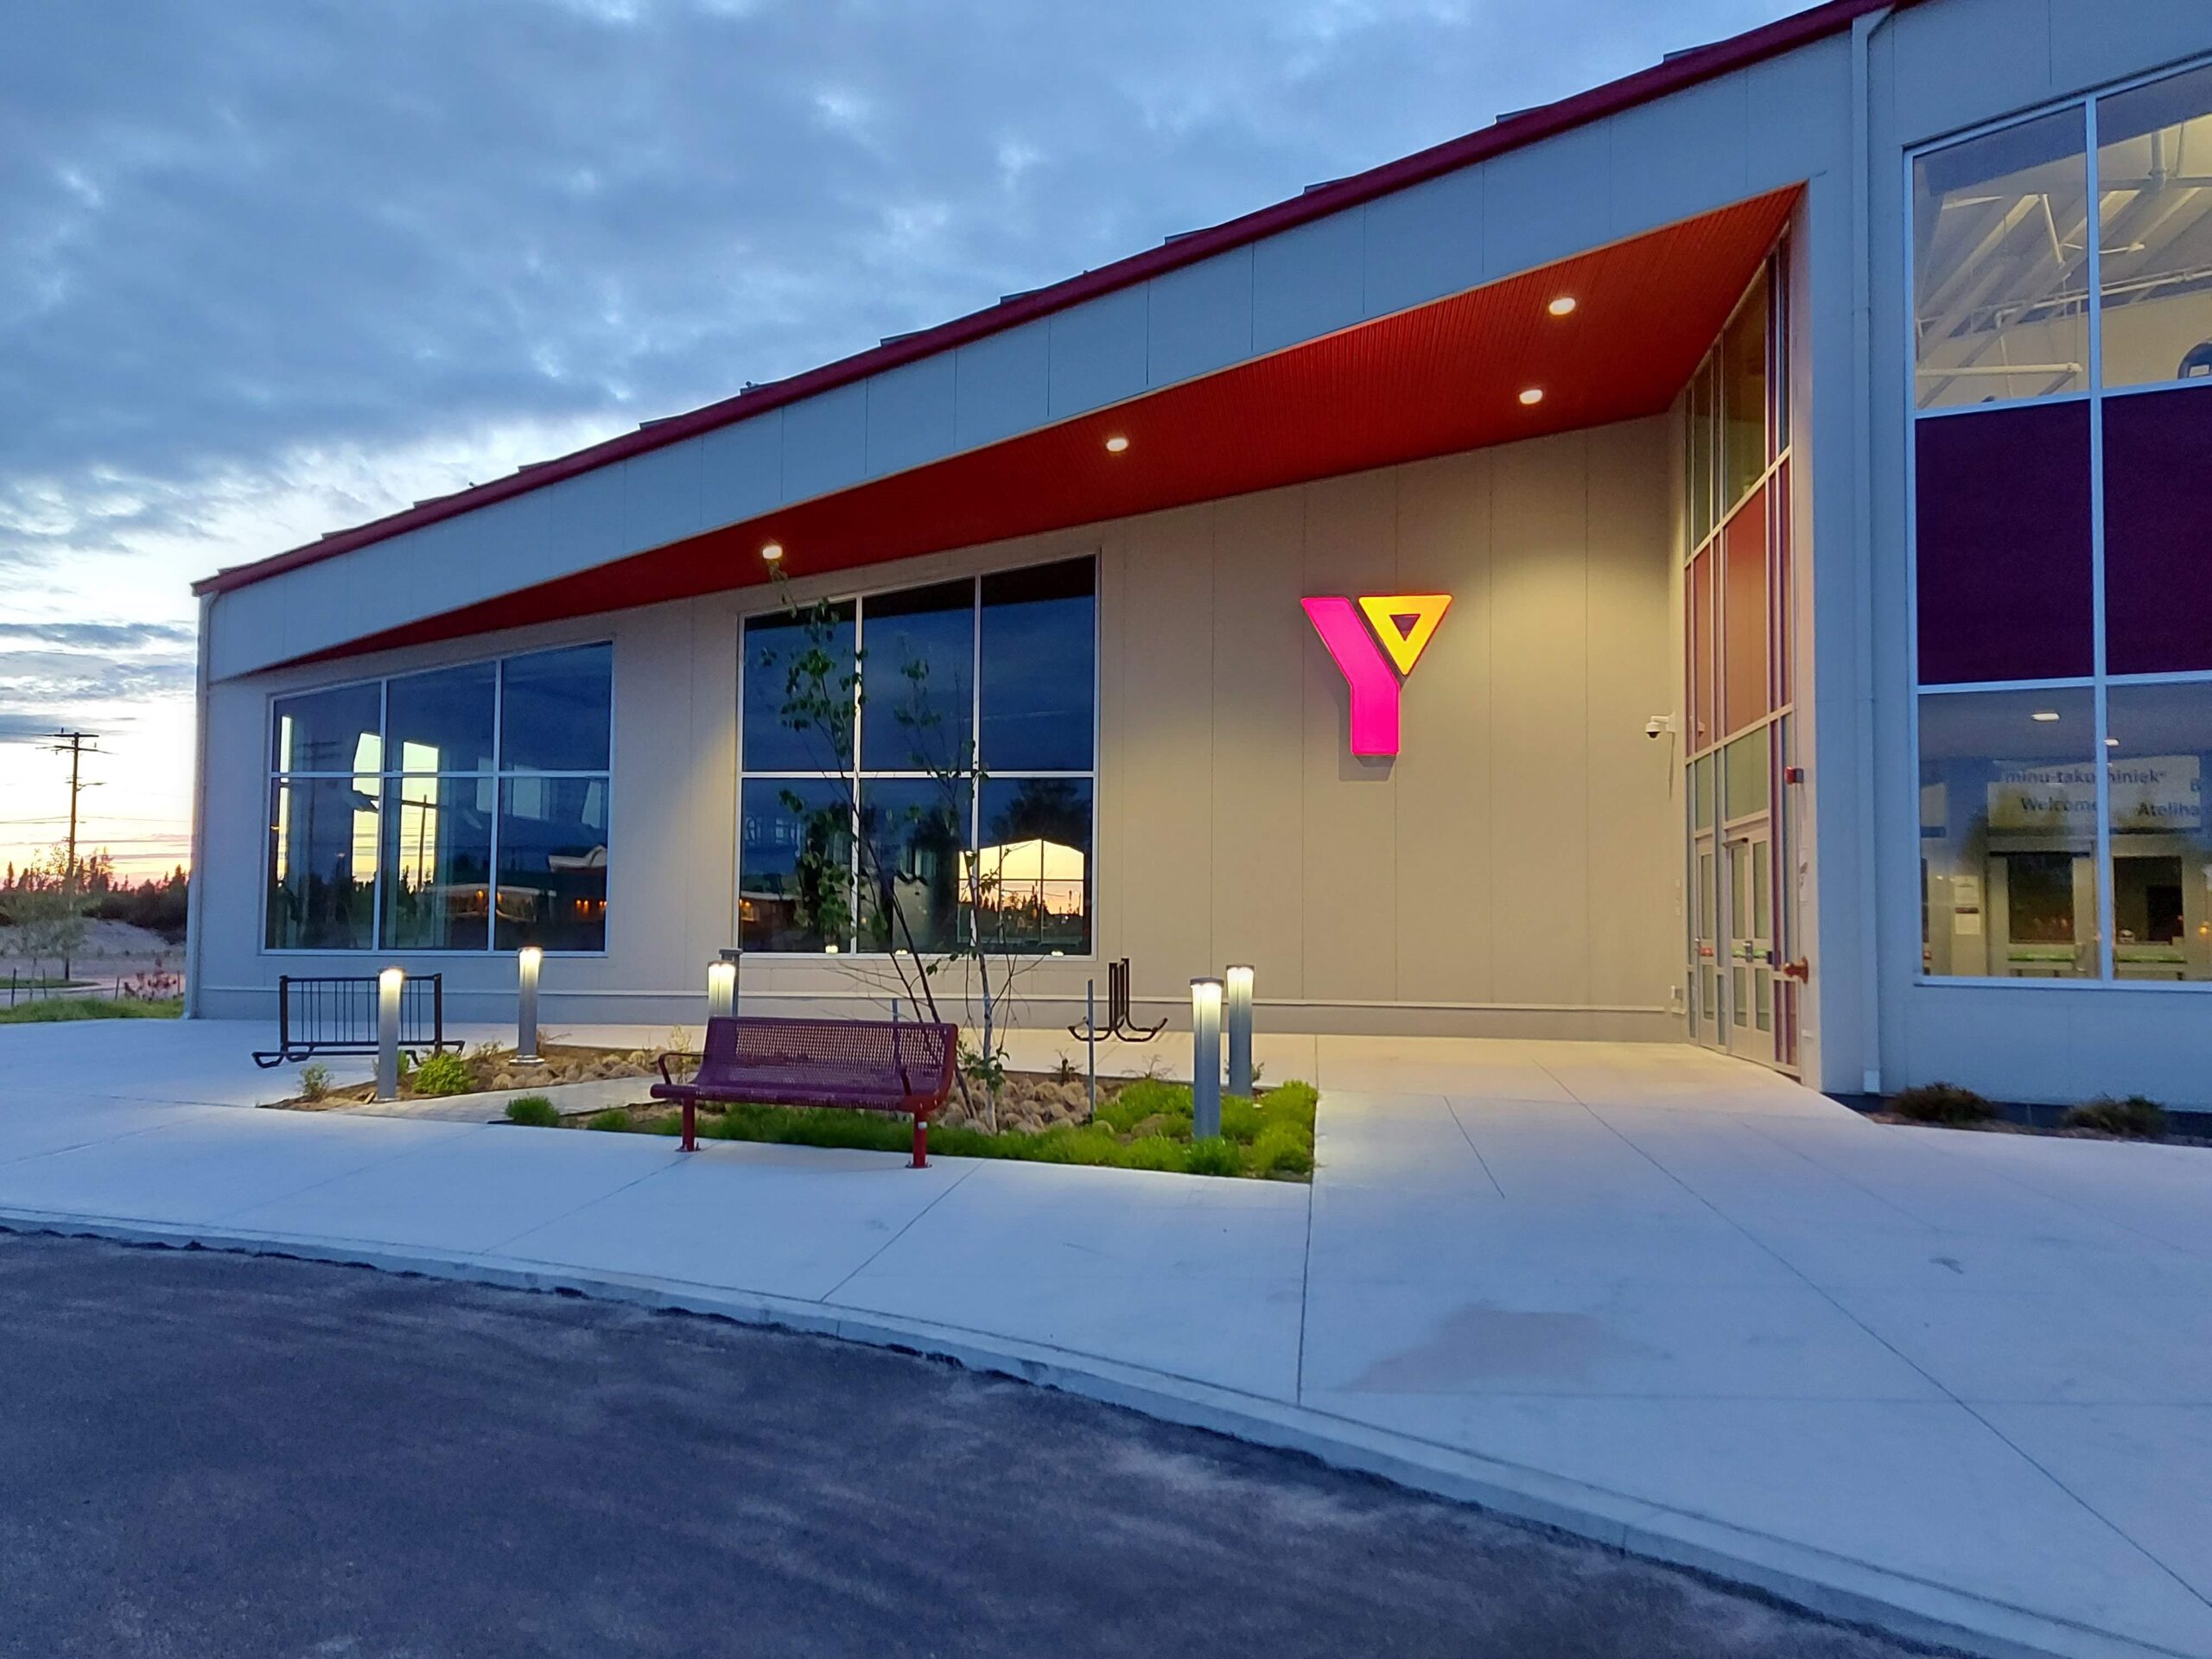 Mockup of outside of Central Labrador YMCA